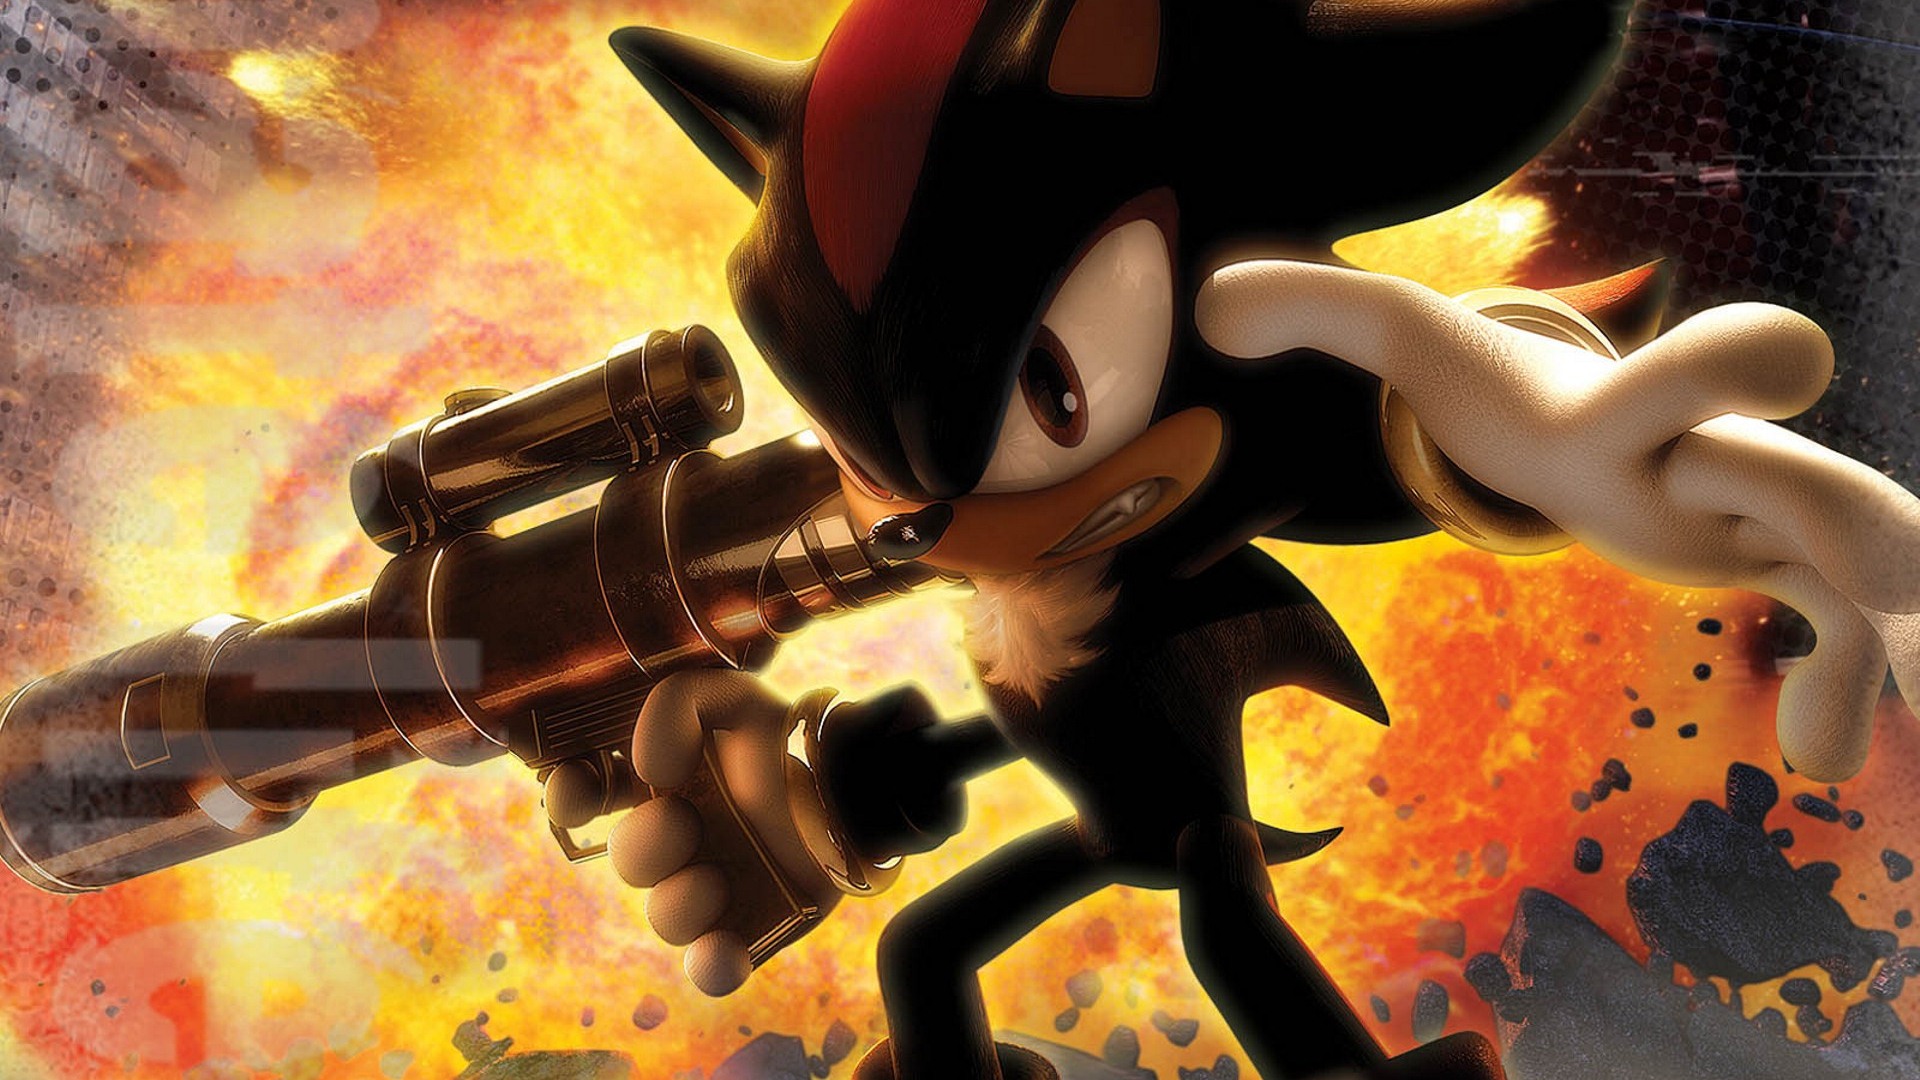 Sonic HD wallpapers #11 - 1920x1080